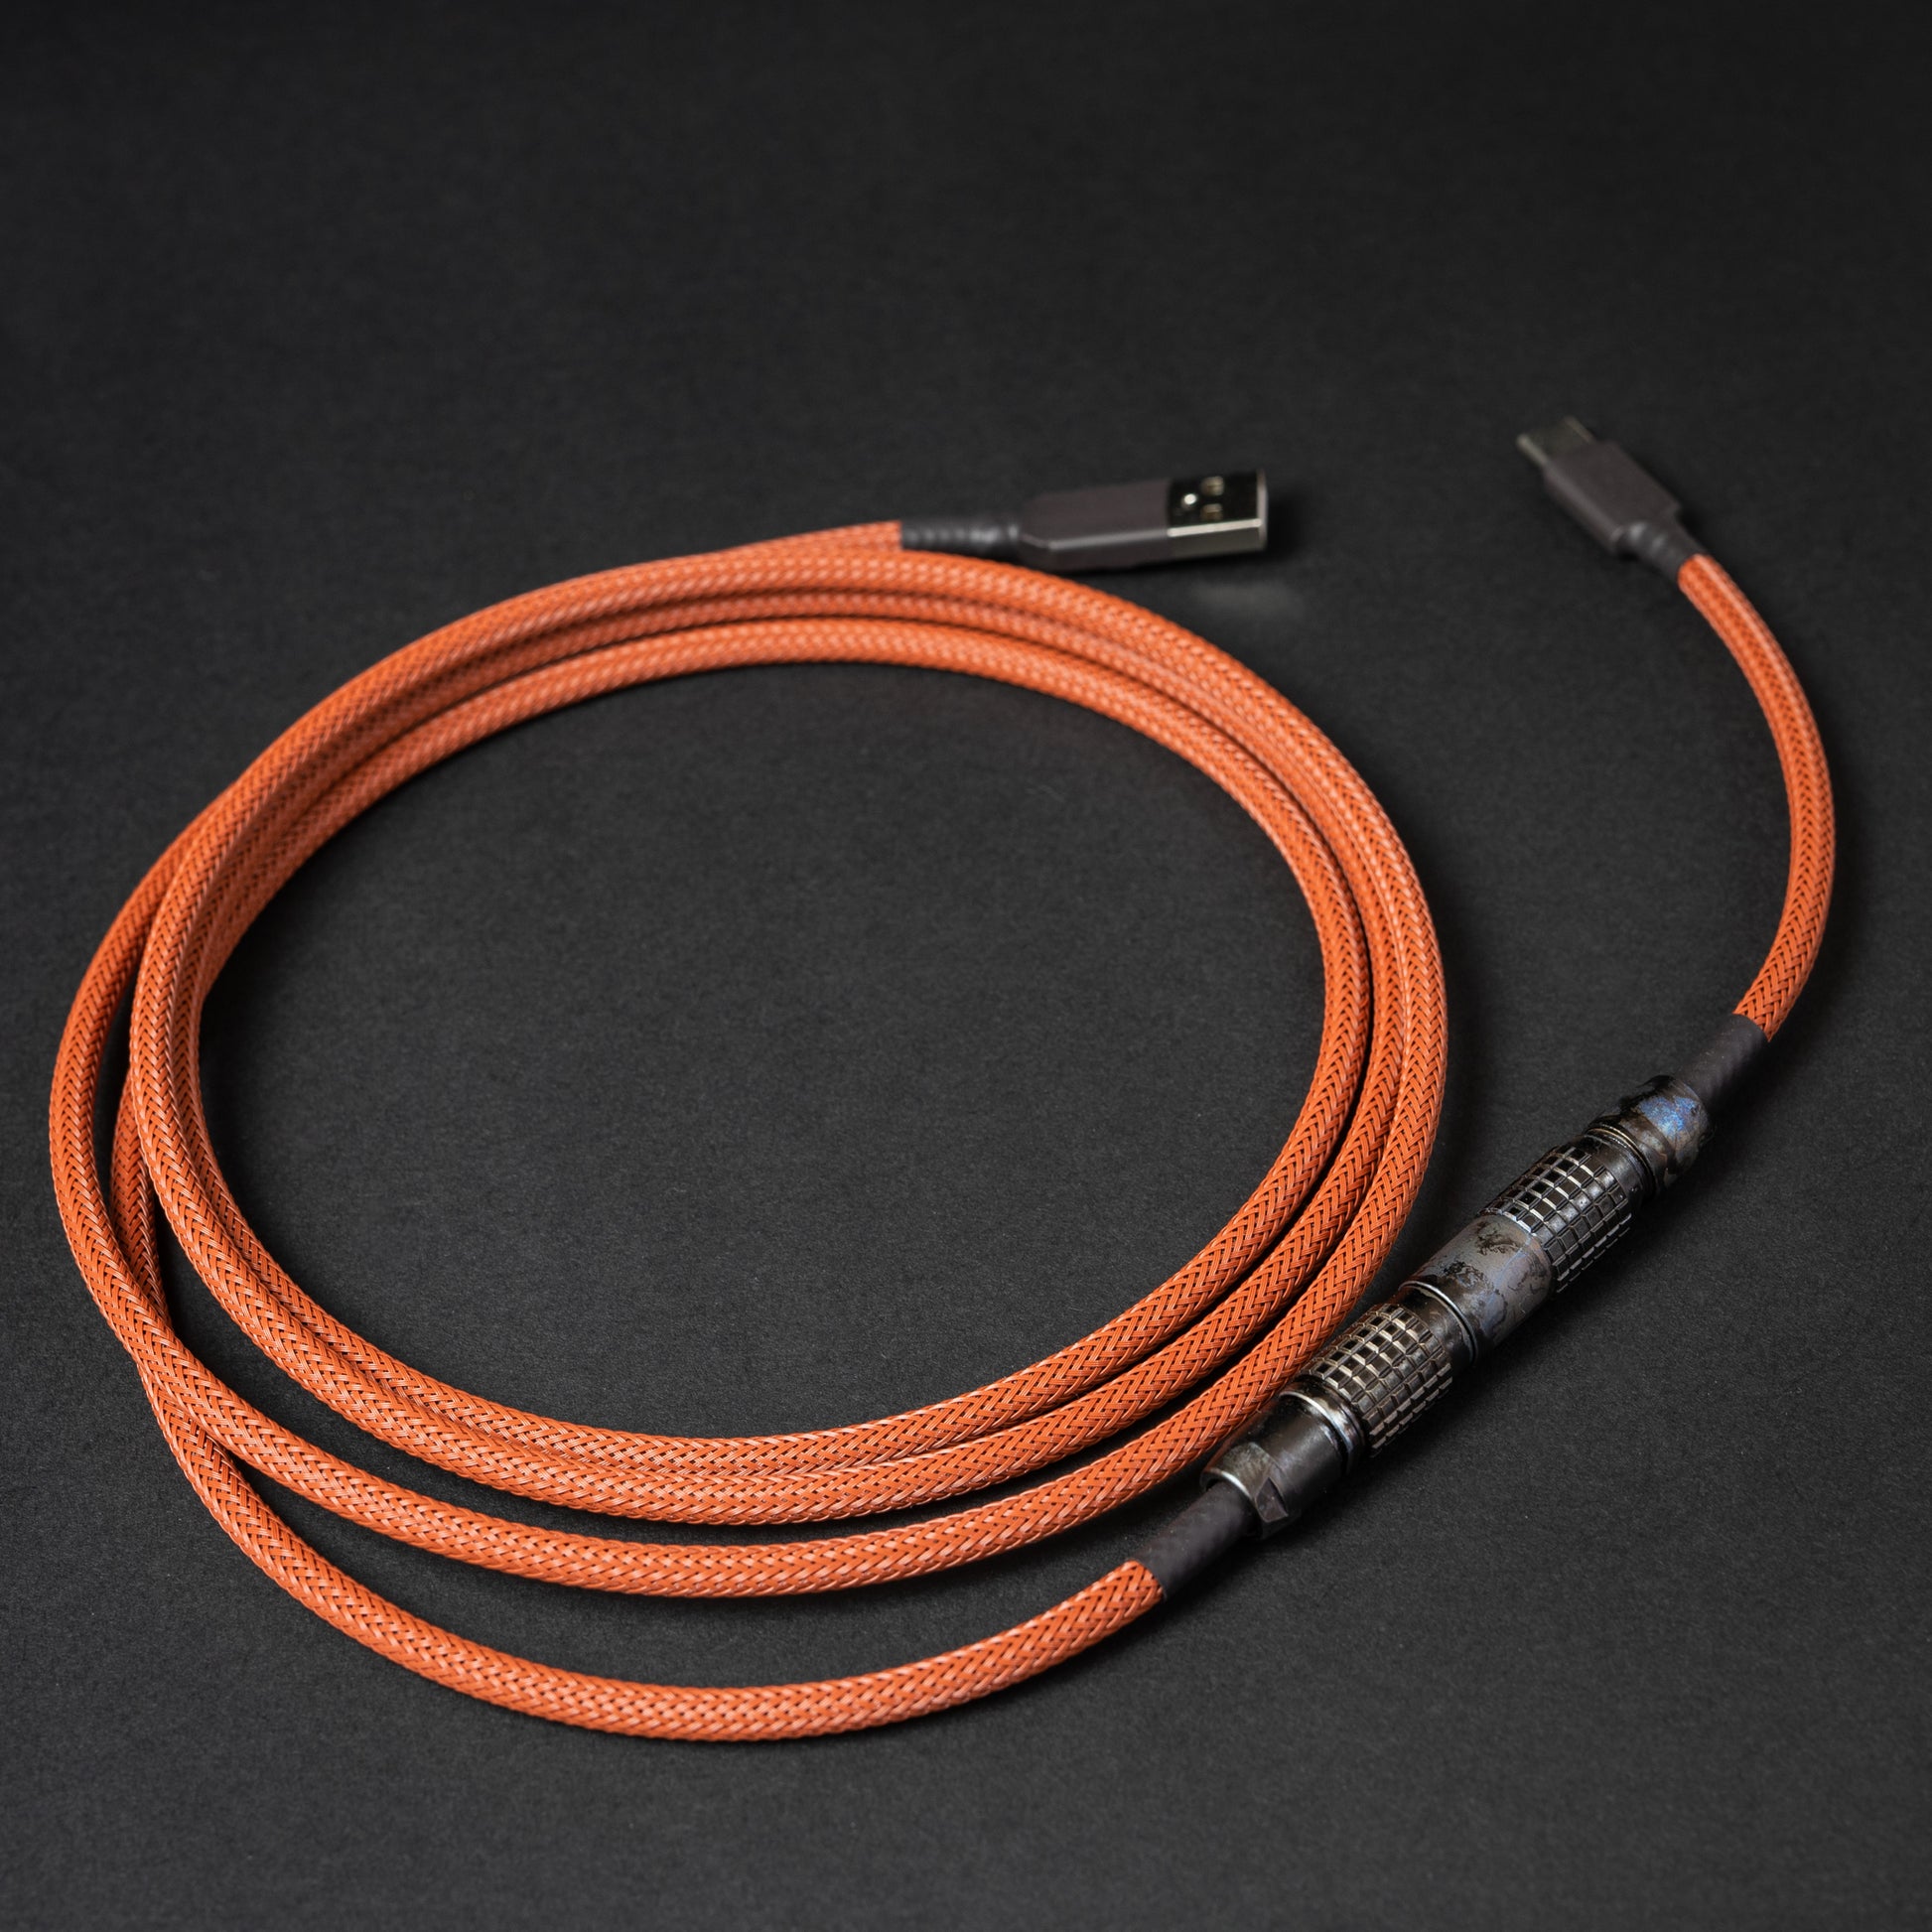 DIY Cable Coiling Tutorial - Coiled Cables for Mechanical Keyboards 